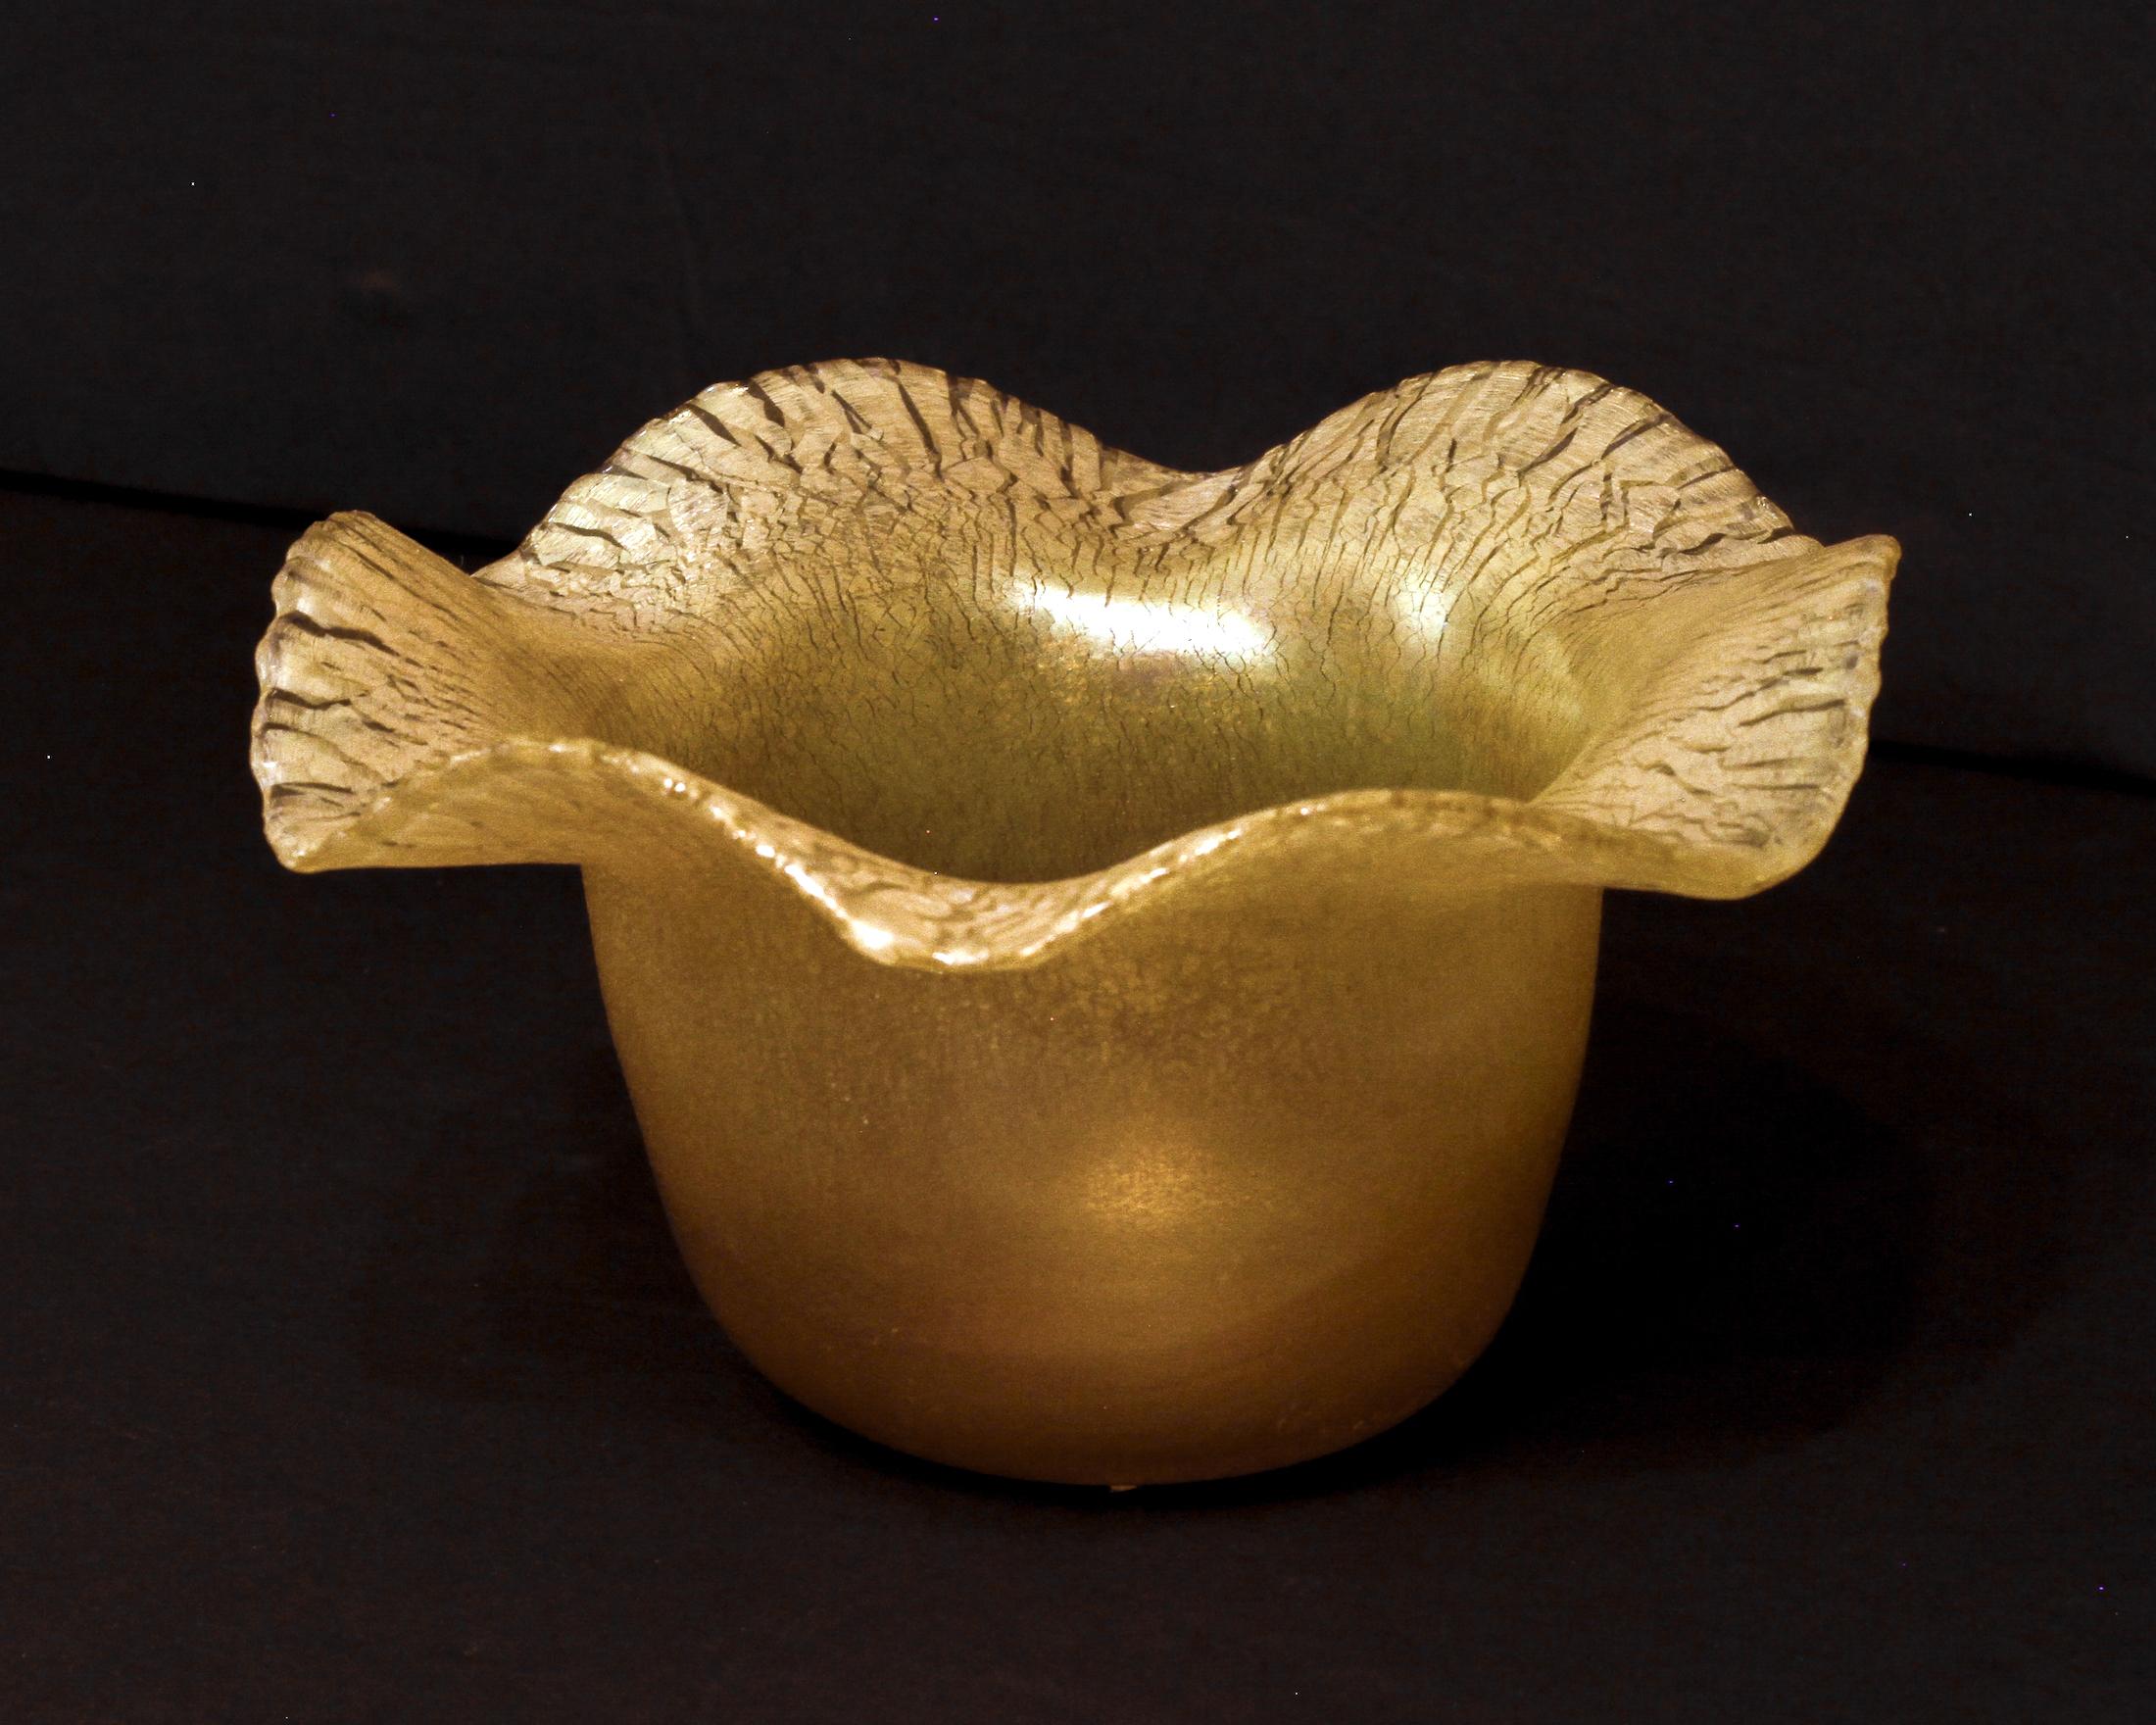 A delicate gold iridescent favrile art glass bowl by Tiffany and Co., featuring a flared and ruffled mouth. 
Height: 3.25 in
Diameter: approx. 5.5 in.
